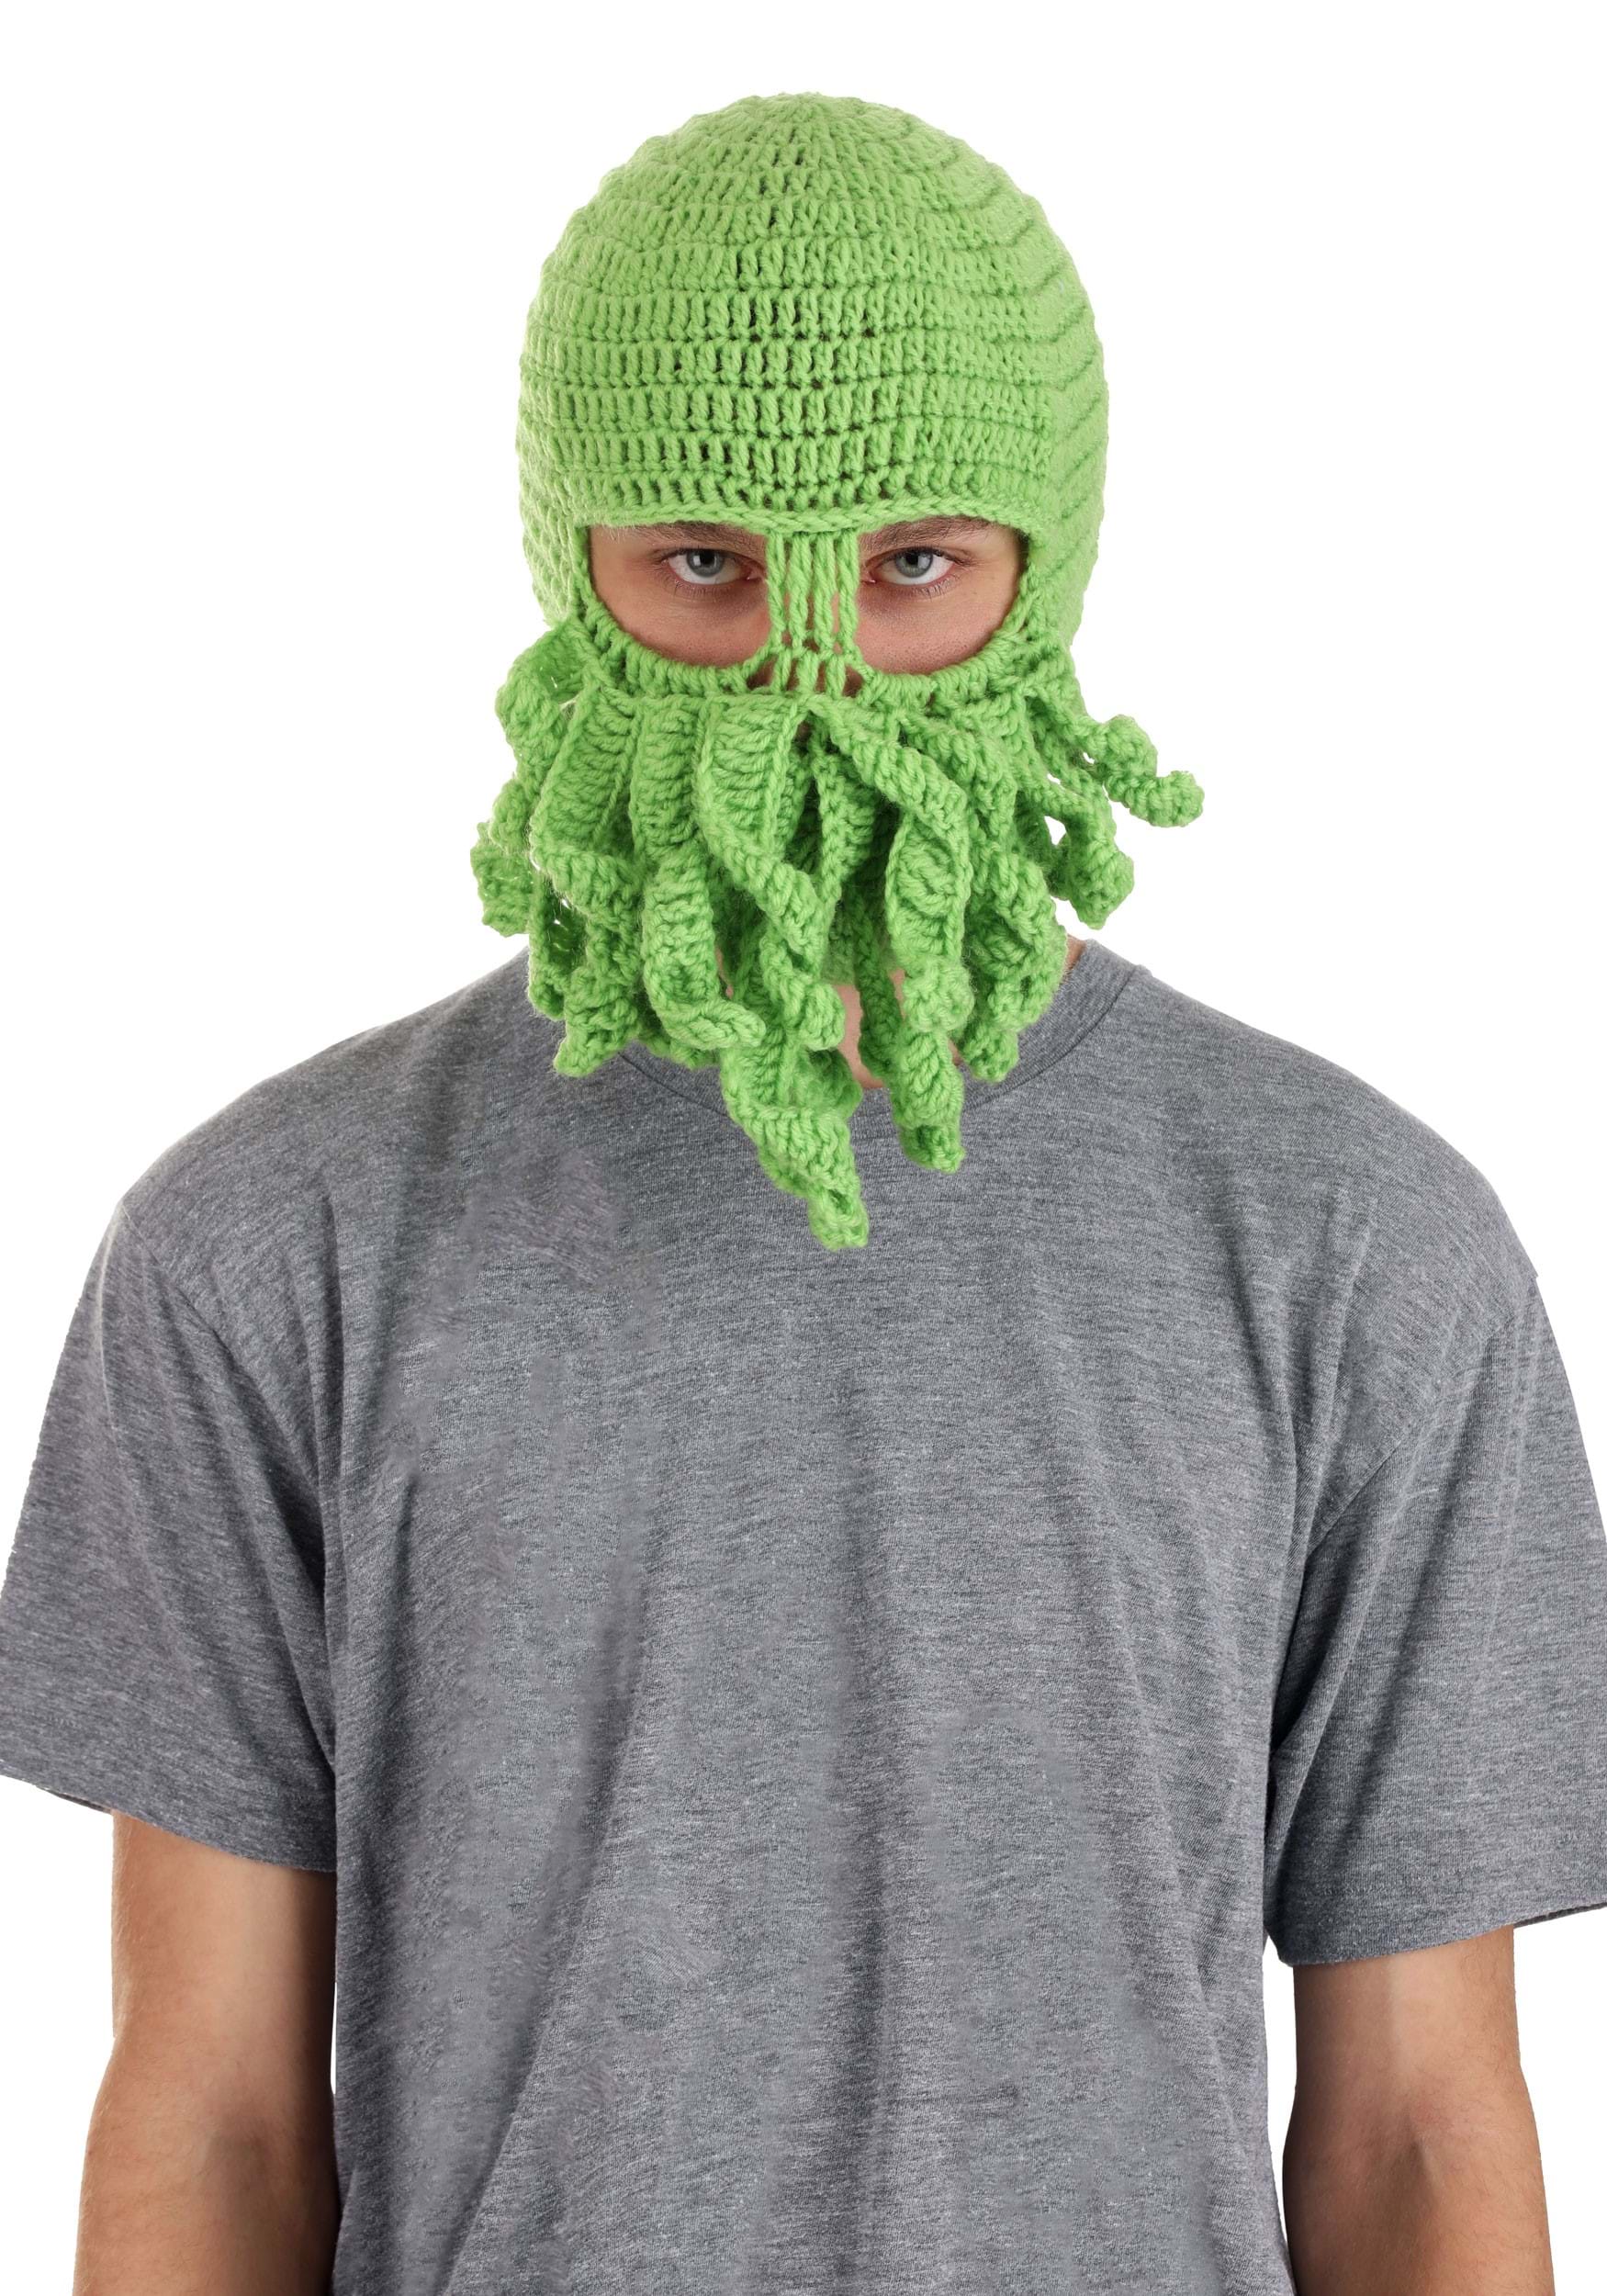 Exclusive Cthulhu Beanie for Adults